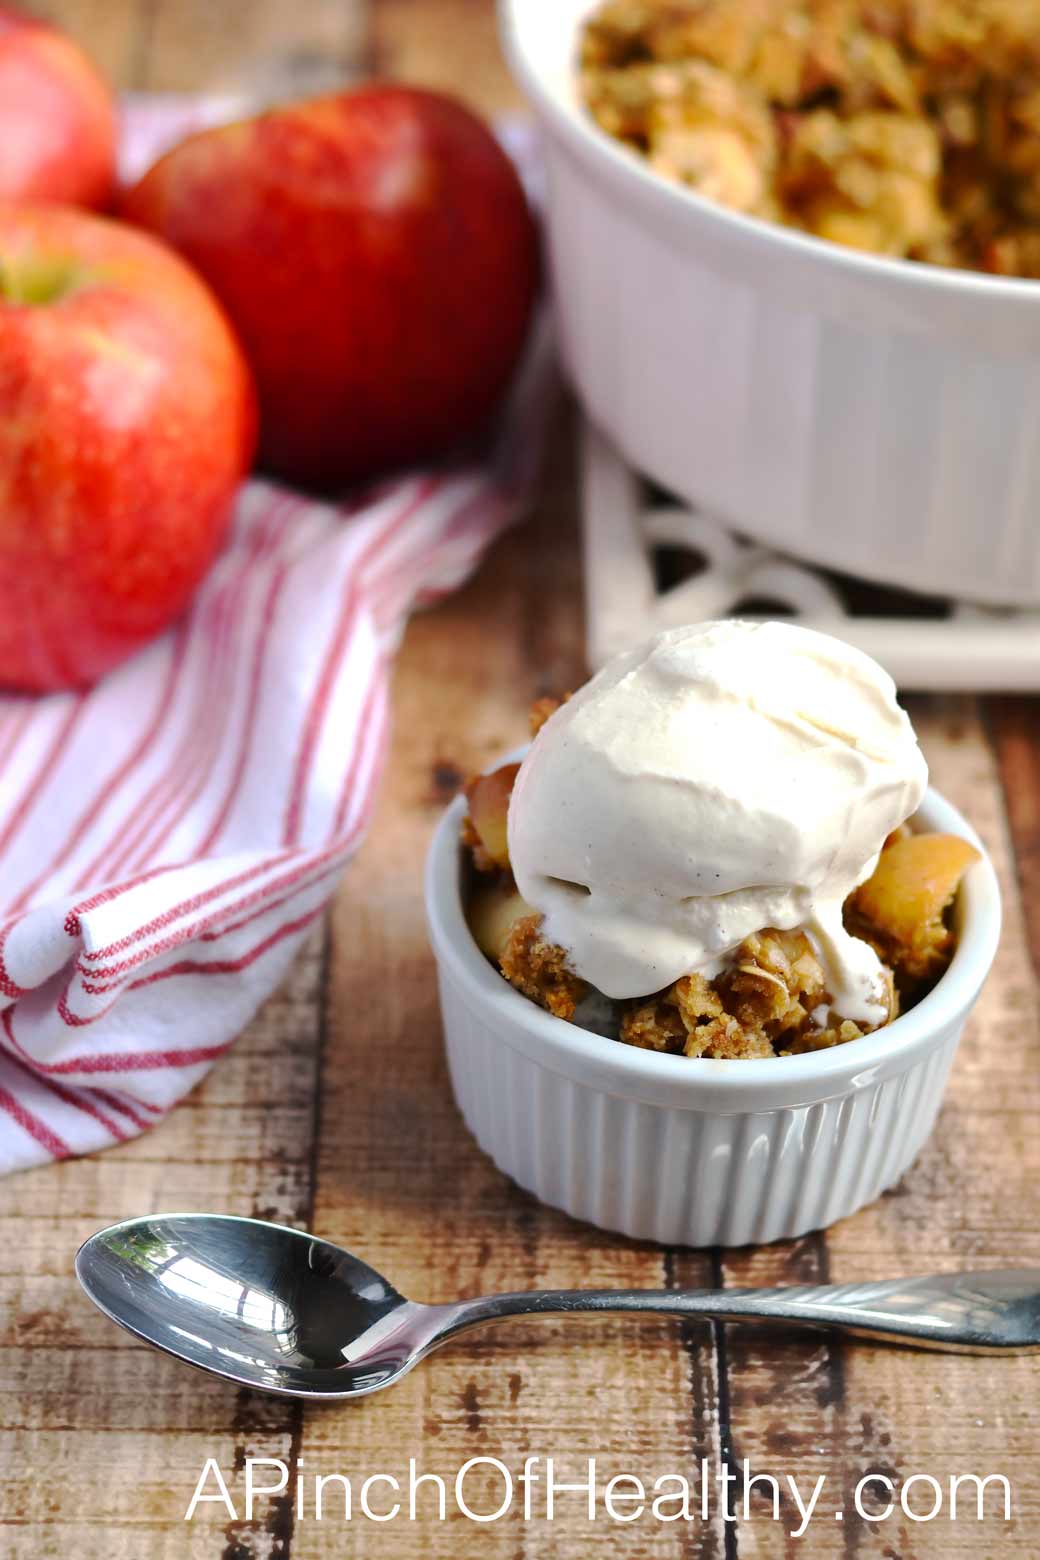 Apple Crisp with Salted Caramel Almond Topping | APinchOfHealthy.com